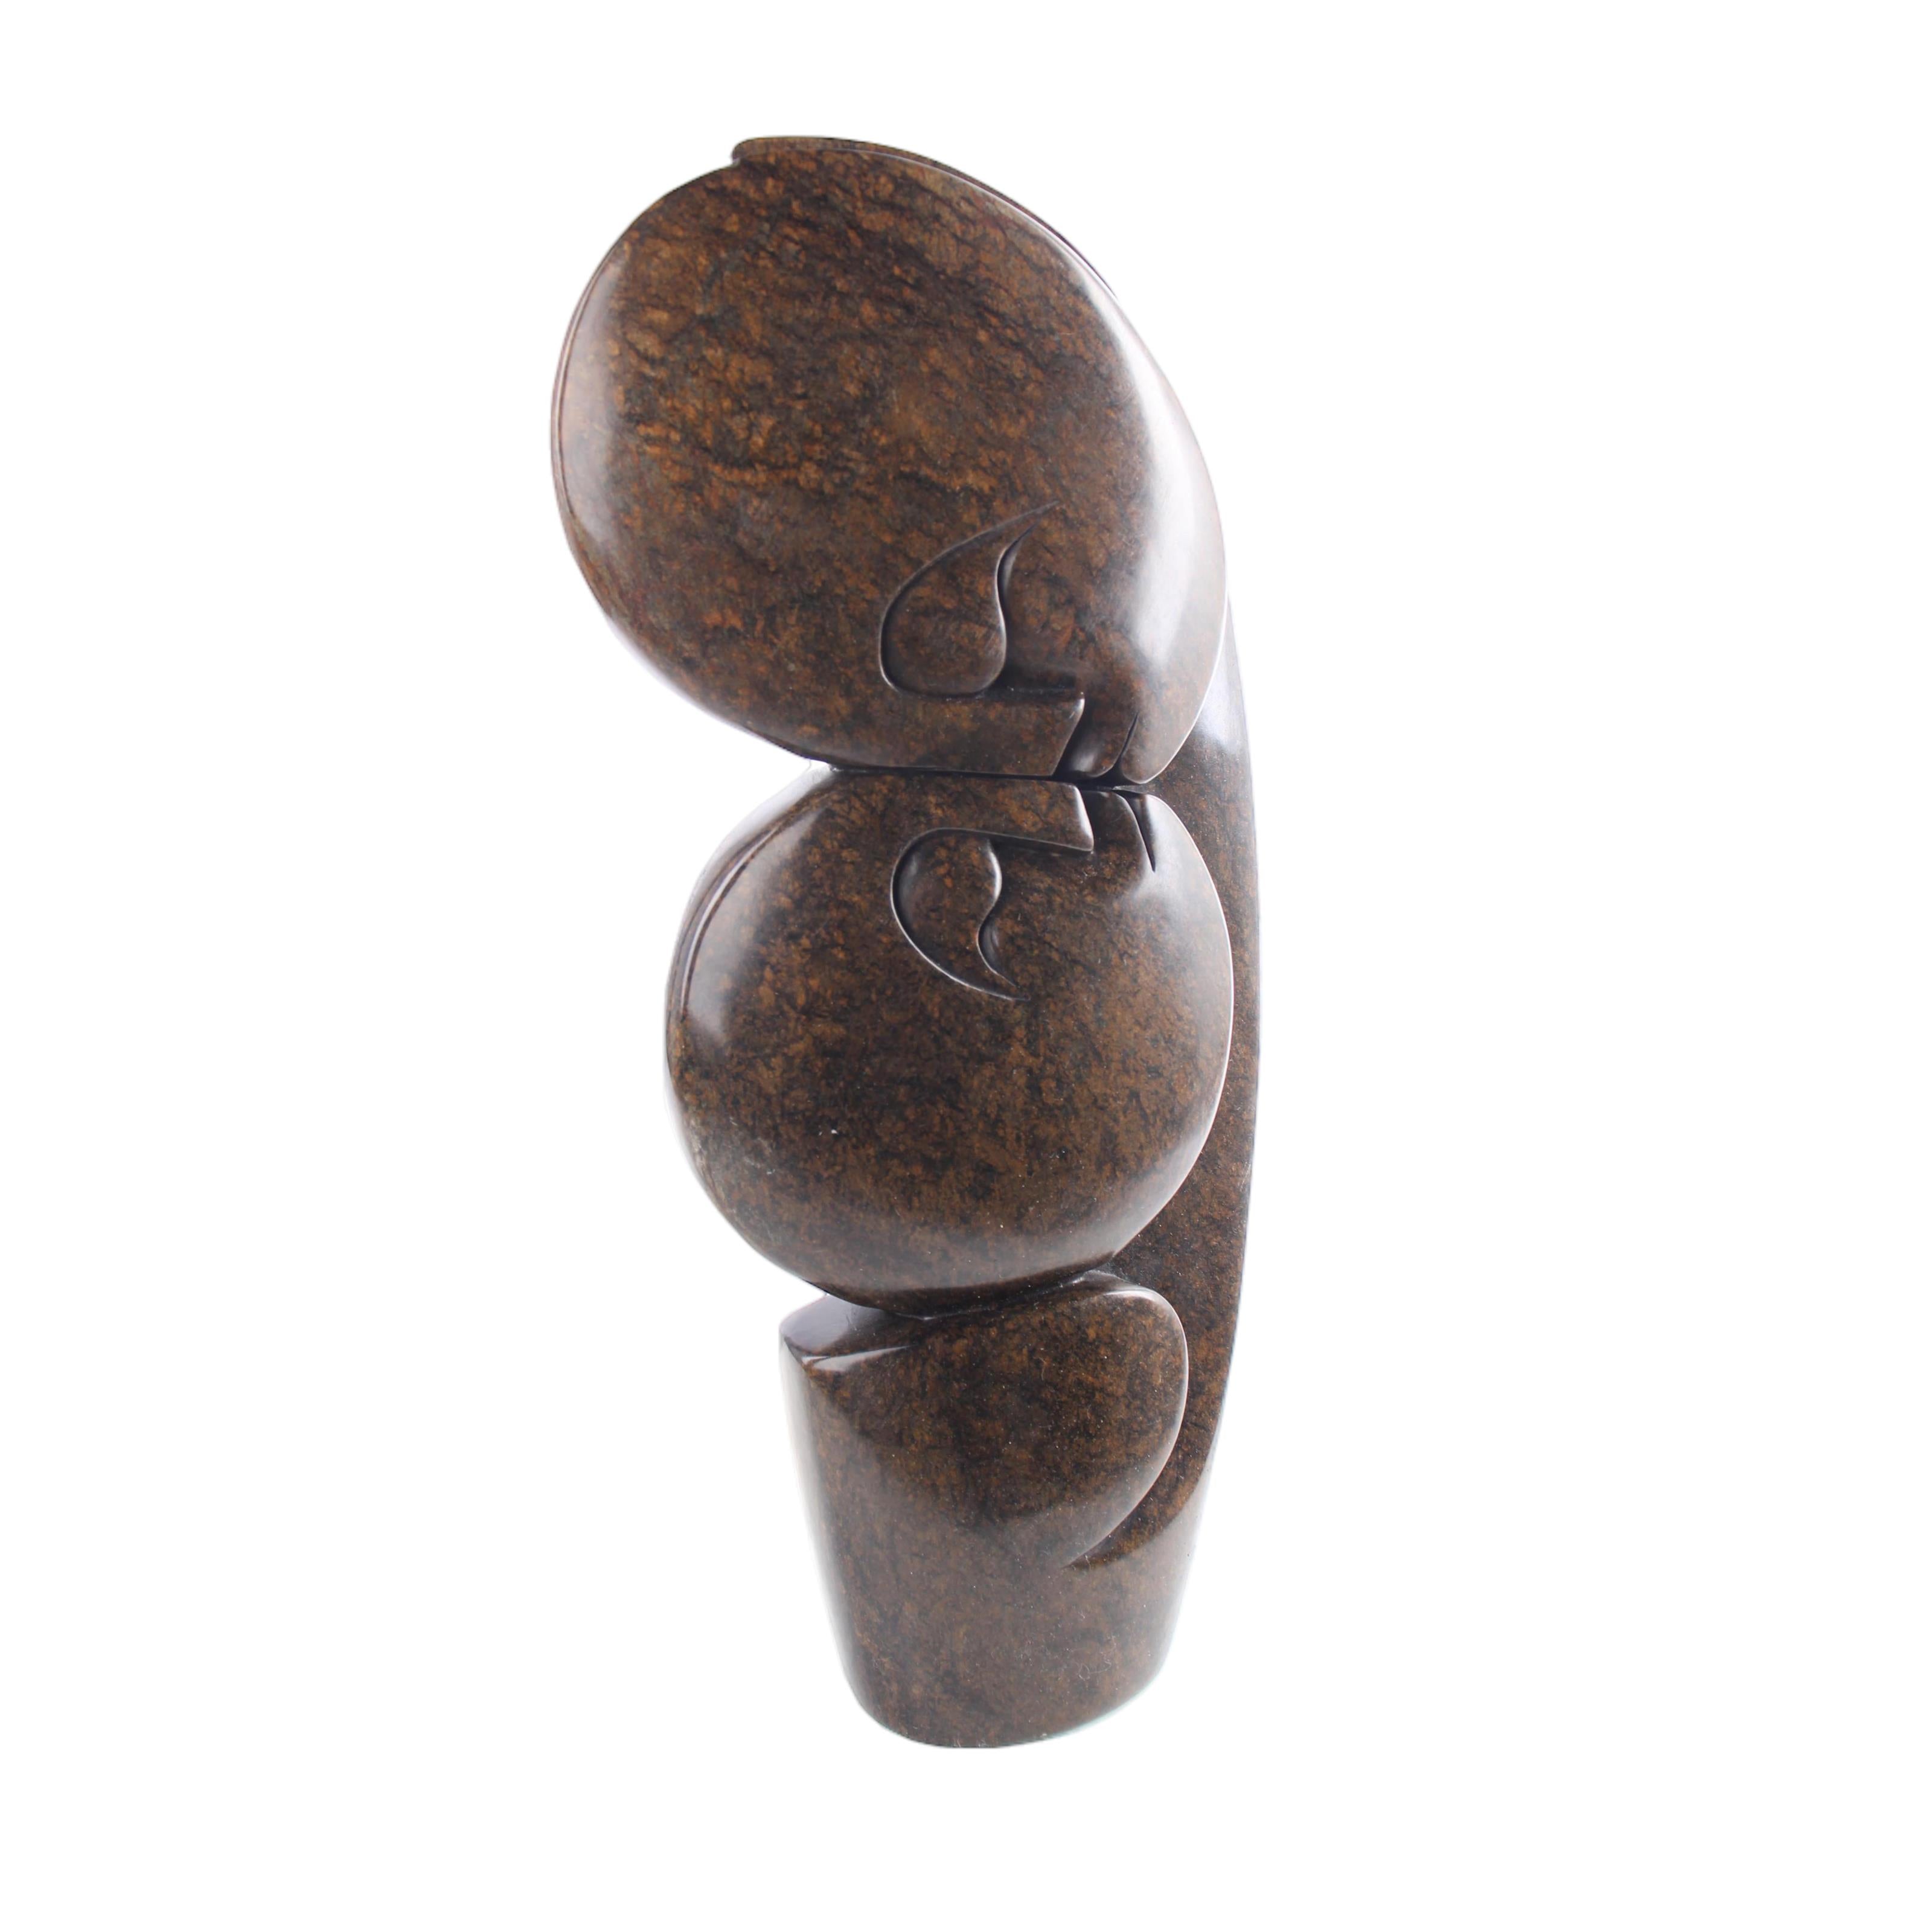 Shona Tribe Serpentine Stone Lovers ~15.4" Tall - Lovers